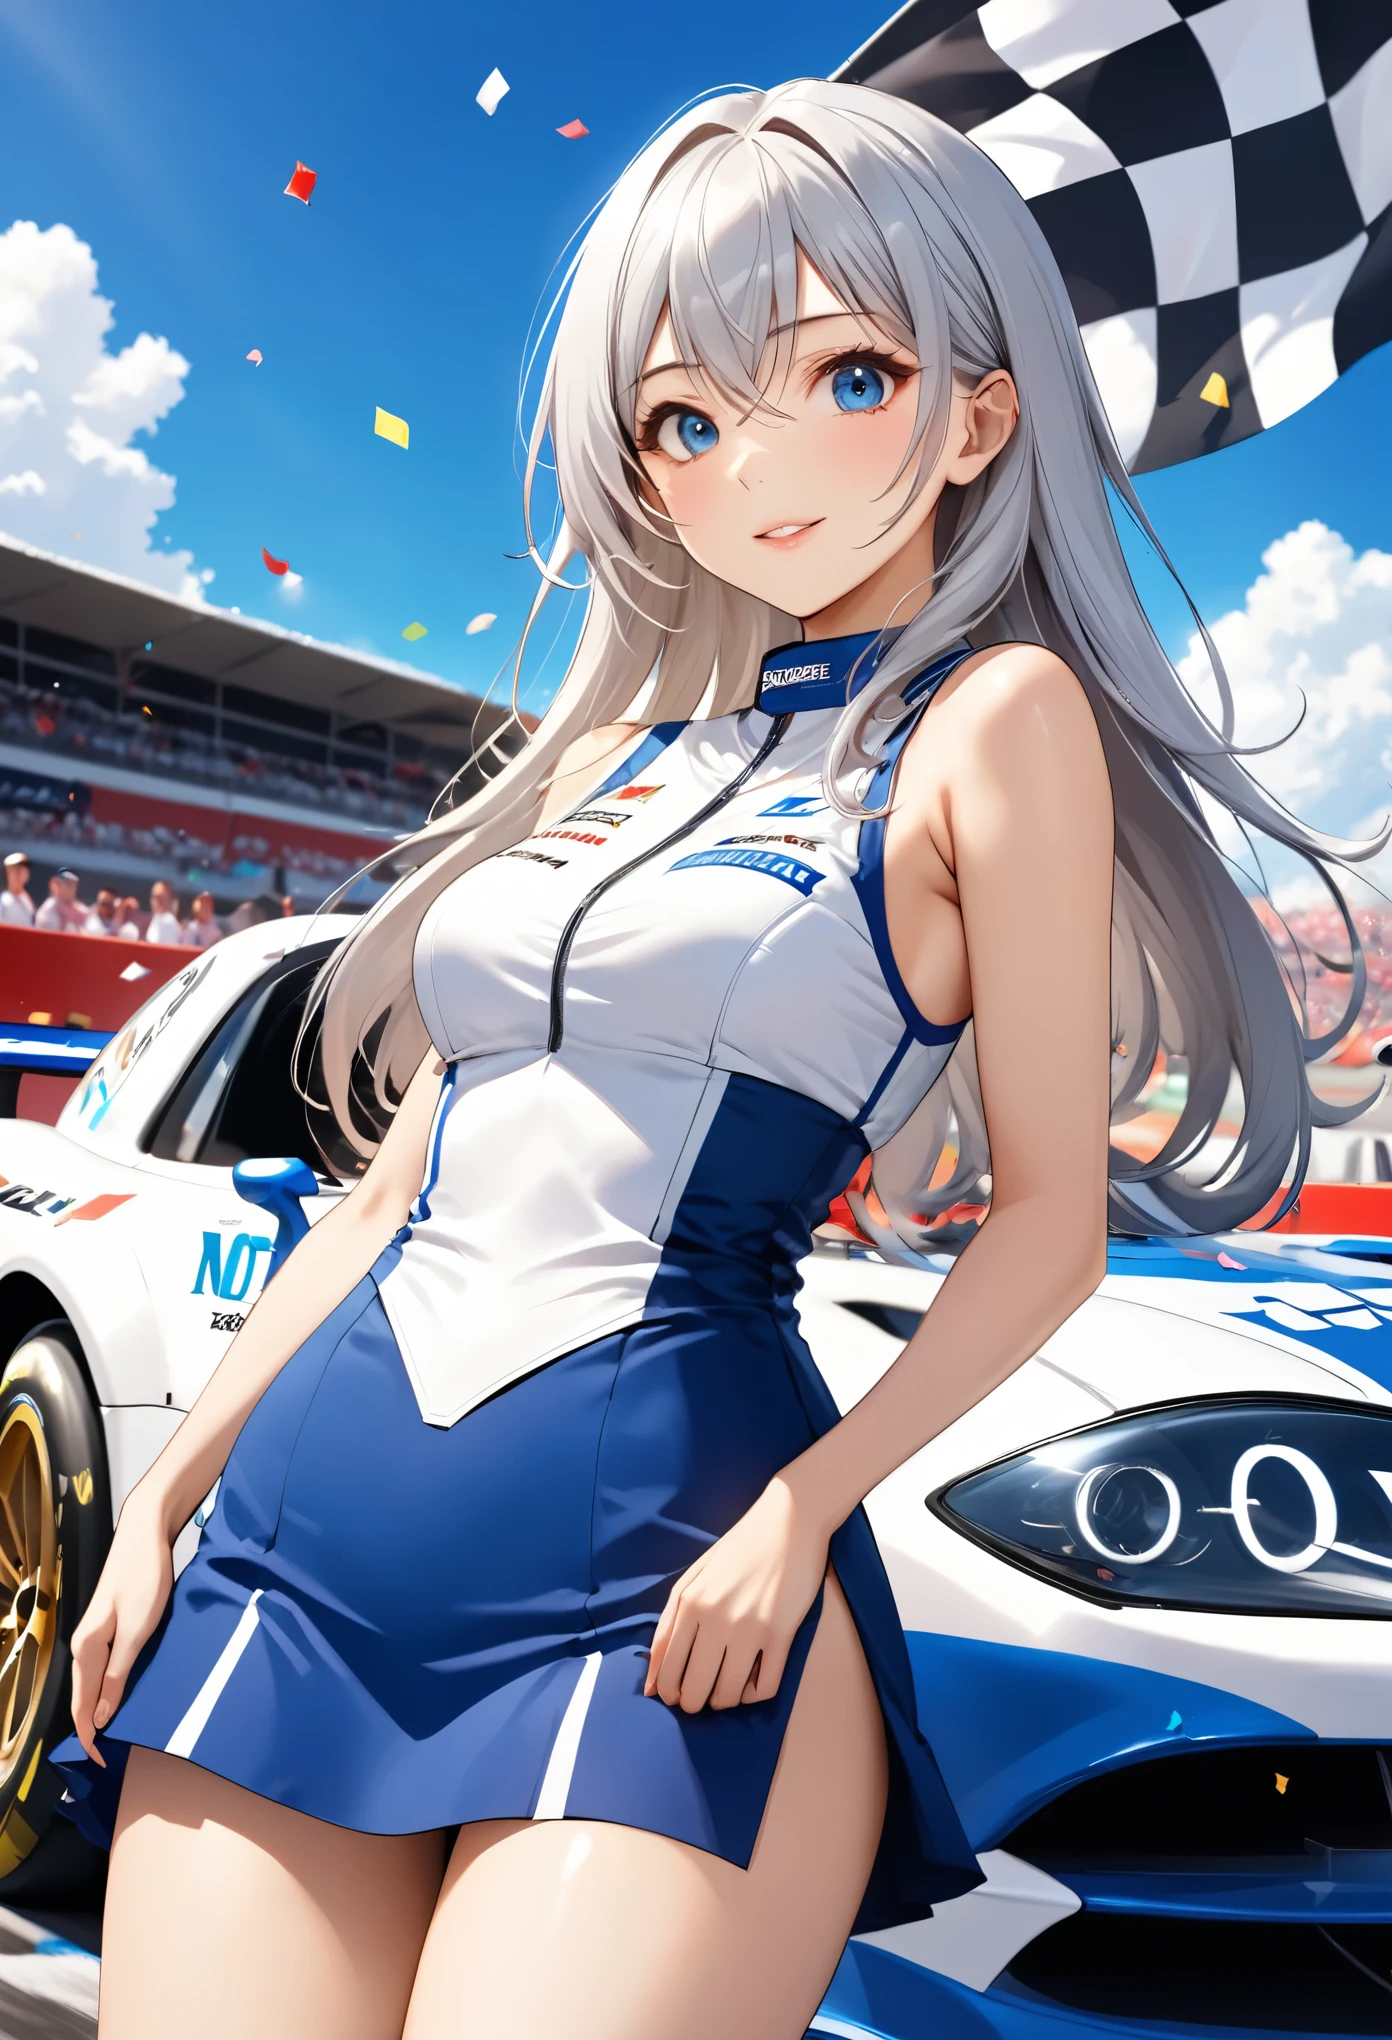 Highest quality, Super quality, 16K, Incredibly absurd, Very detailed, 2.5D, delicate and dynamic, blue sky, Confetti, Racing Car, Checkered Flag, Small face, Extremely delicate facial expression, Delicate eye depiction, Upper body close-up, sole sexy lady, healthy shaped body, 22 years old lady, Race Queen, 170cm tall, big firm bouncing busts, white silver long hair, sexy long legs, Flashy Race Queen costume, blue long skirt, white leather long boots, Formula 1, Auto Racing Track